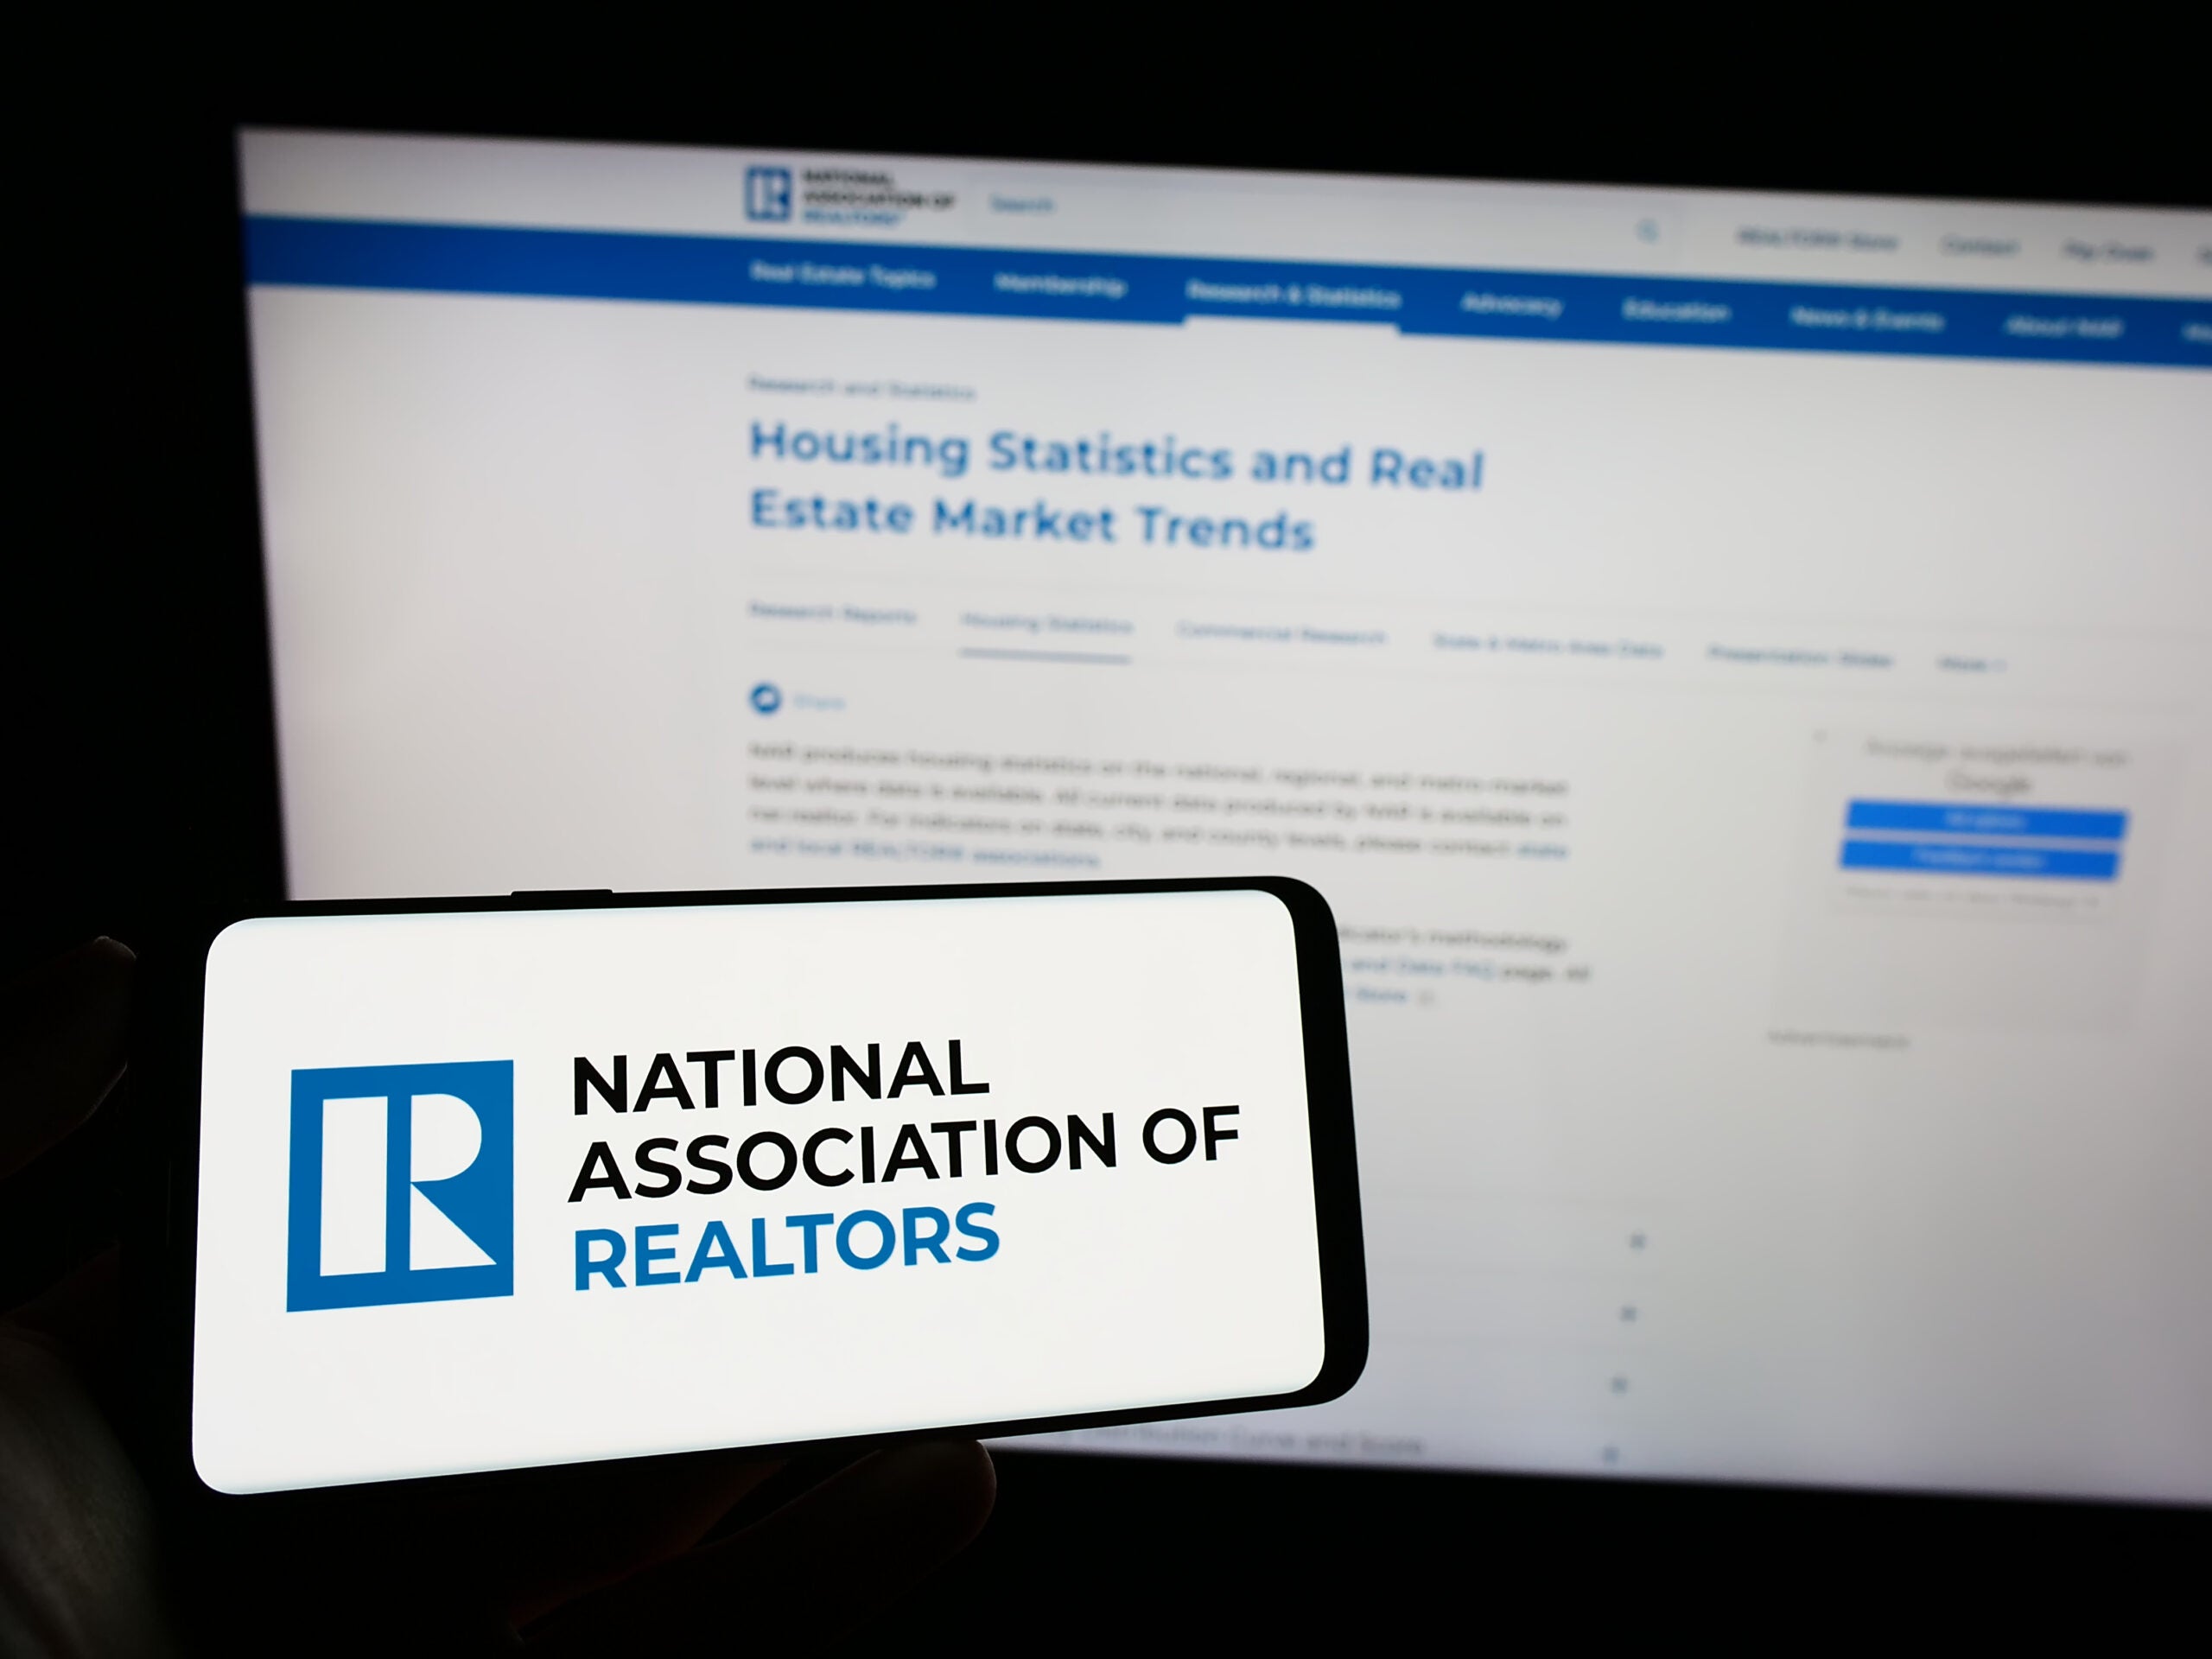 The NAR, or National Association of Realtors, logo on a phone before a computer screen.